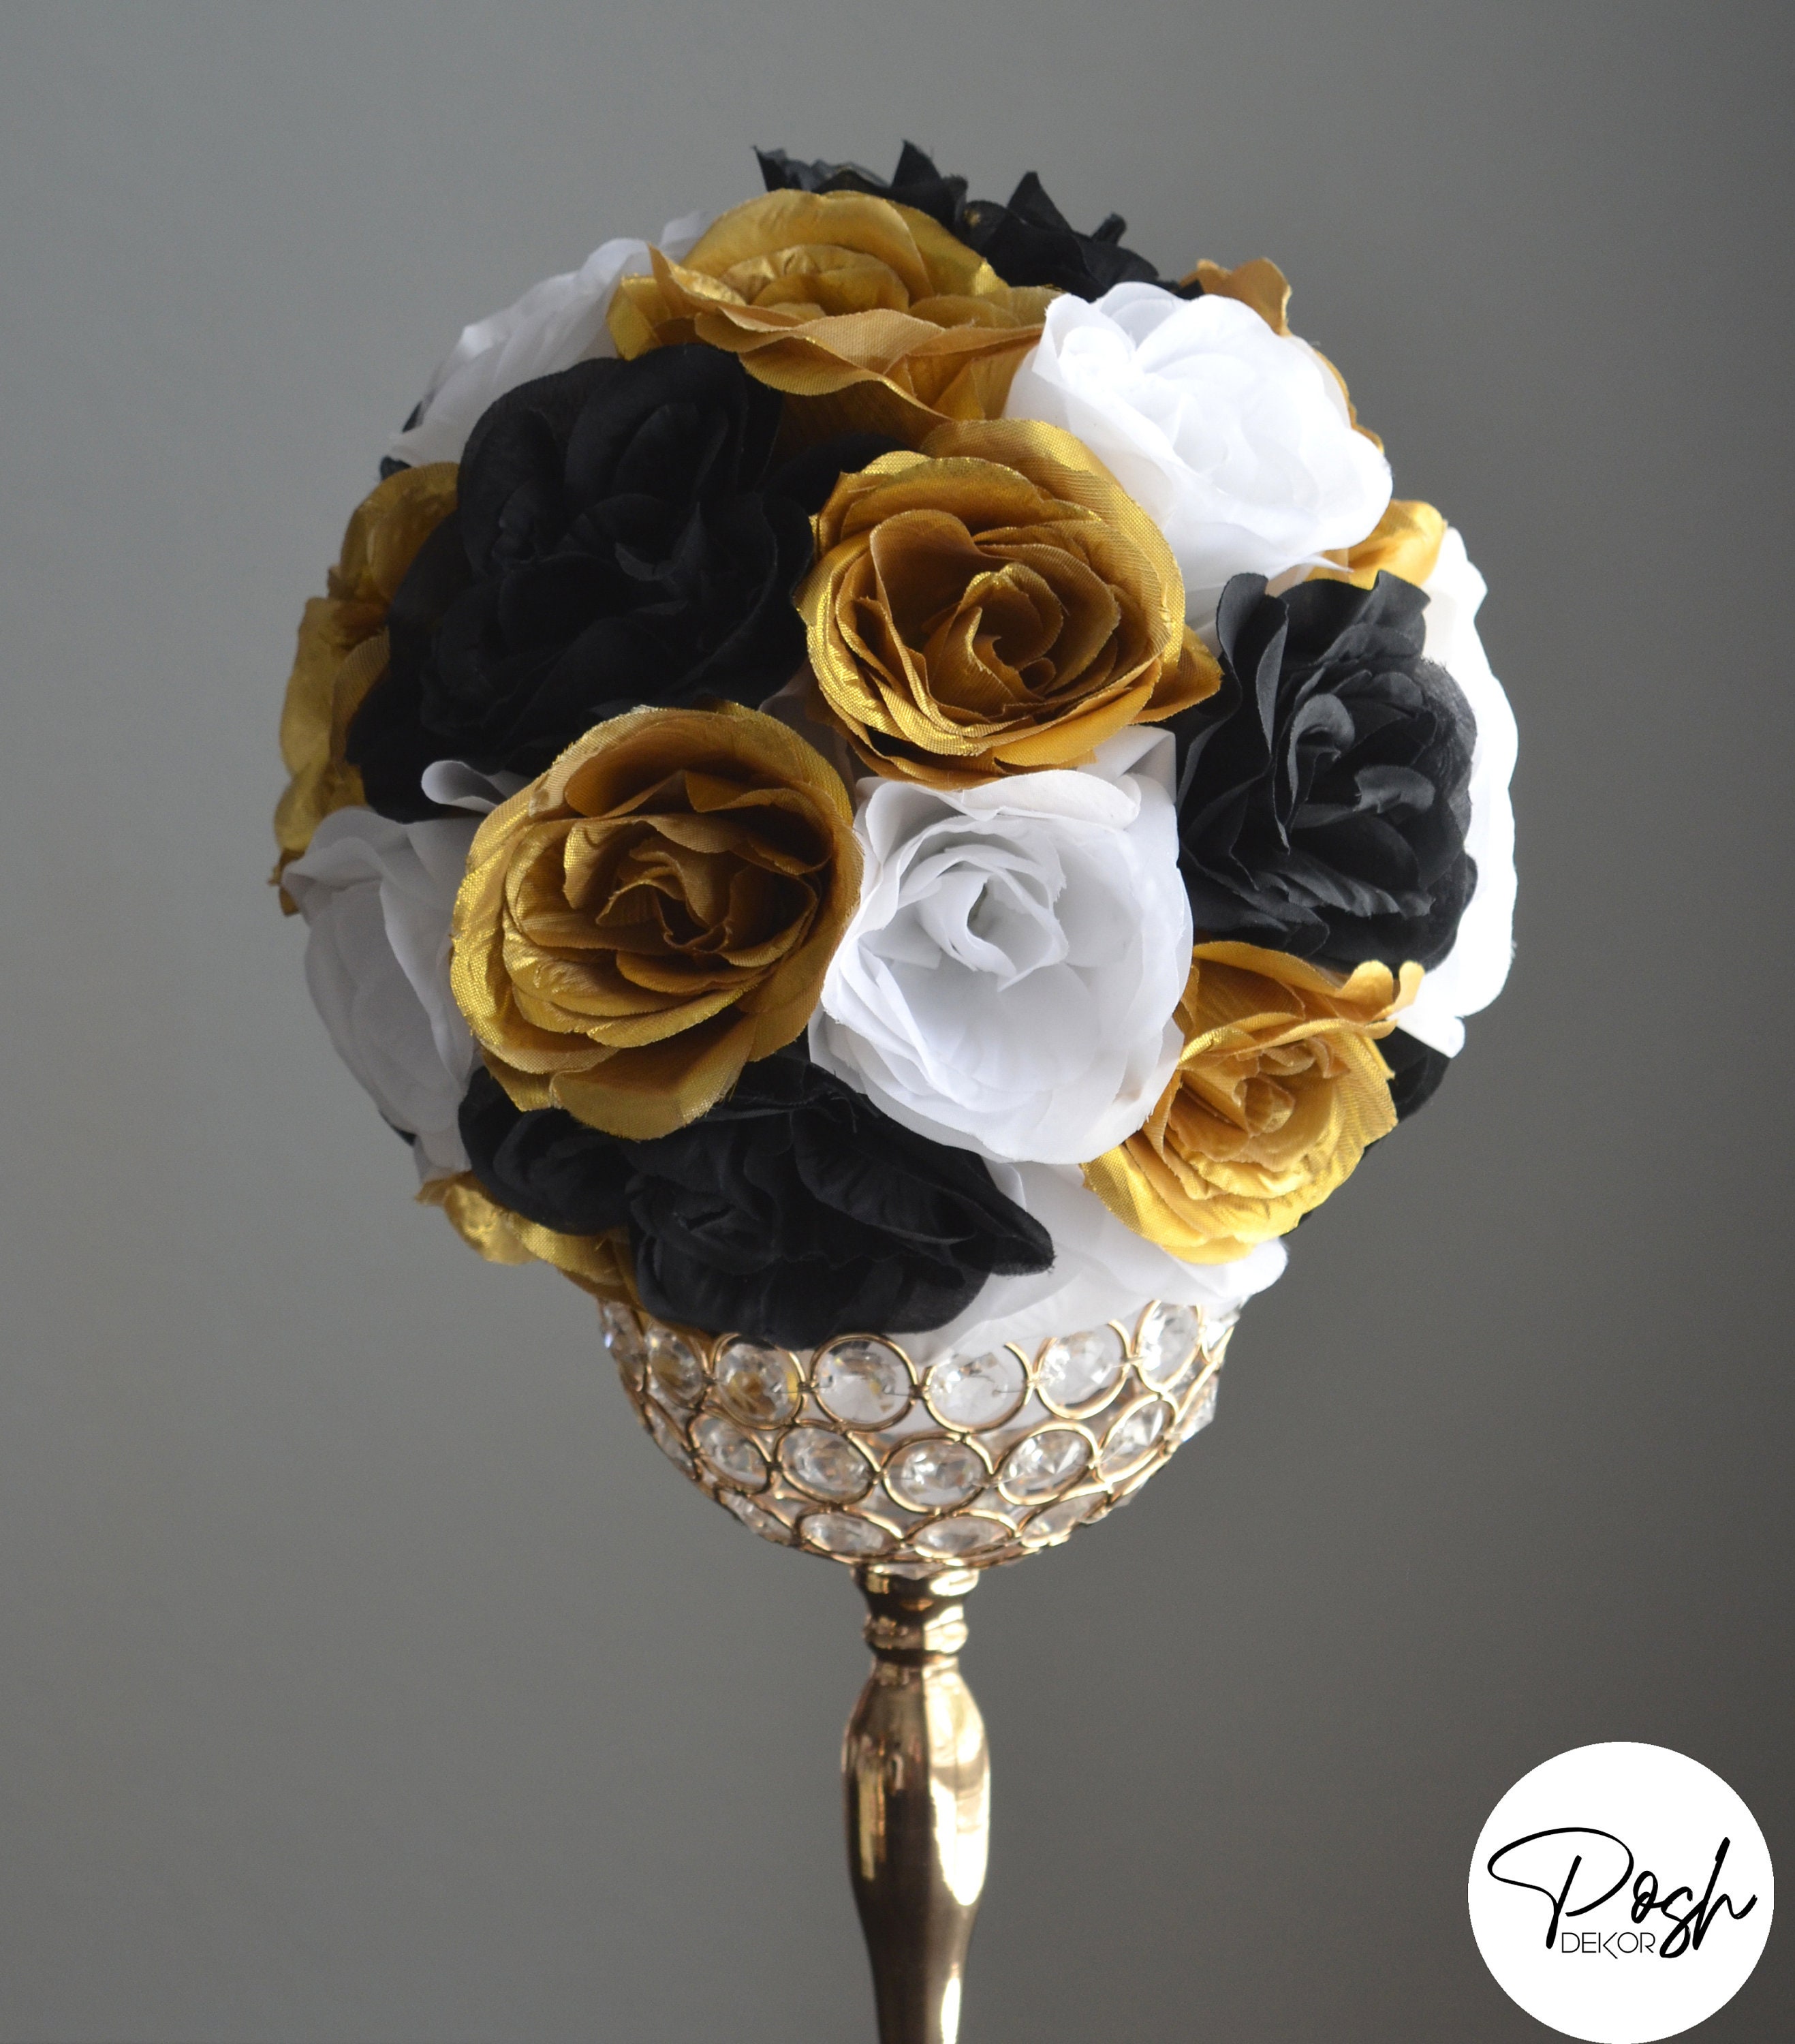 GOLD and BLACK Flower Ball. Gold and Black WEDDING Centerpiece